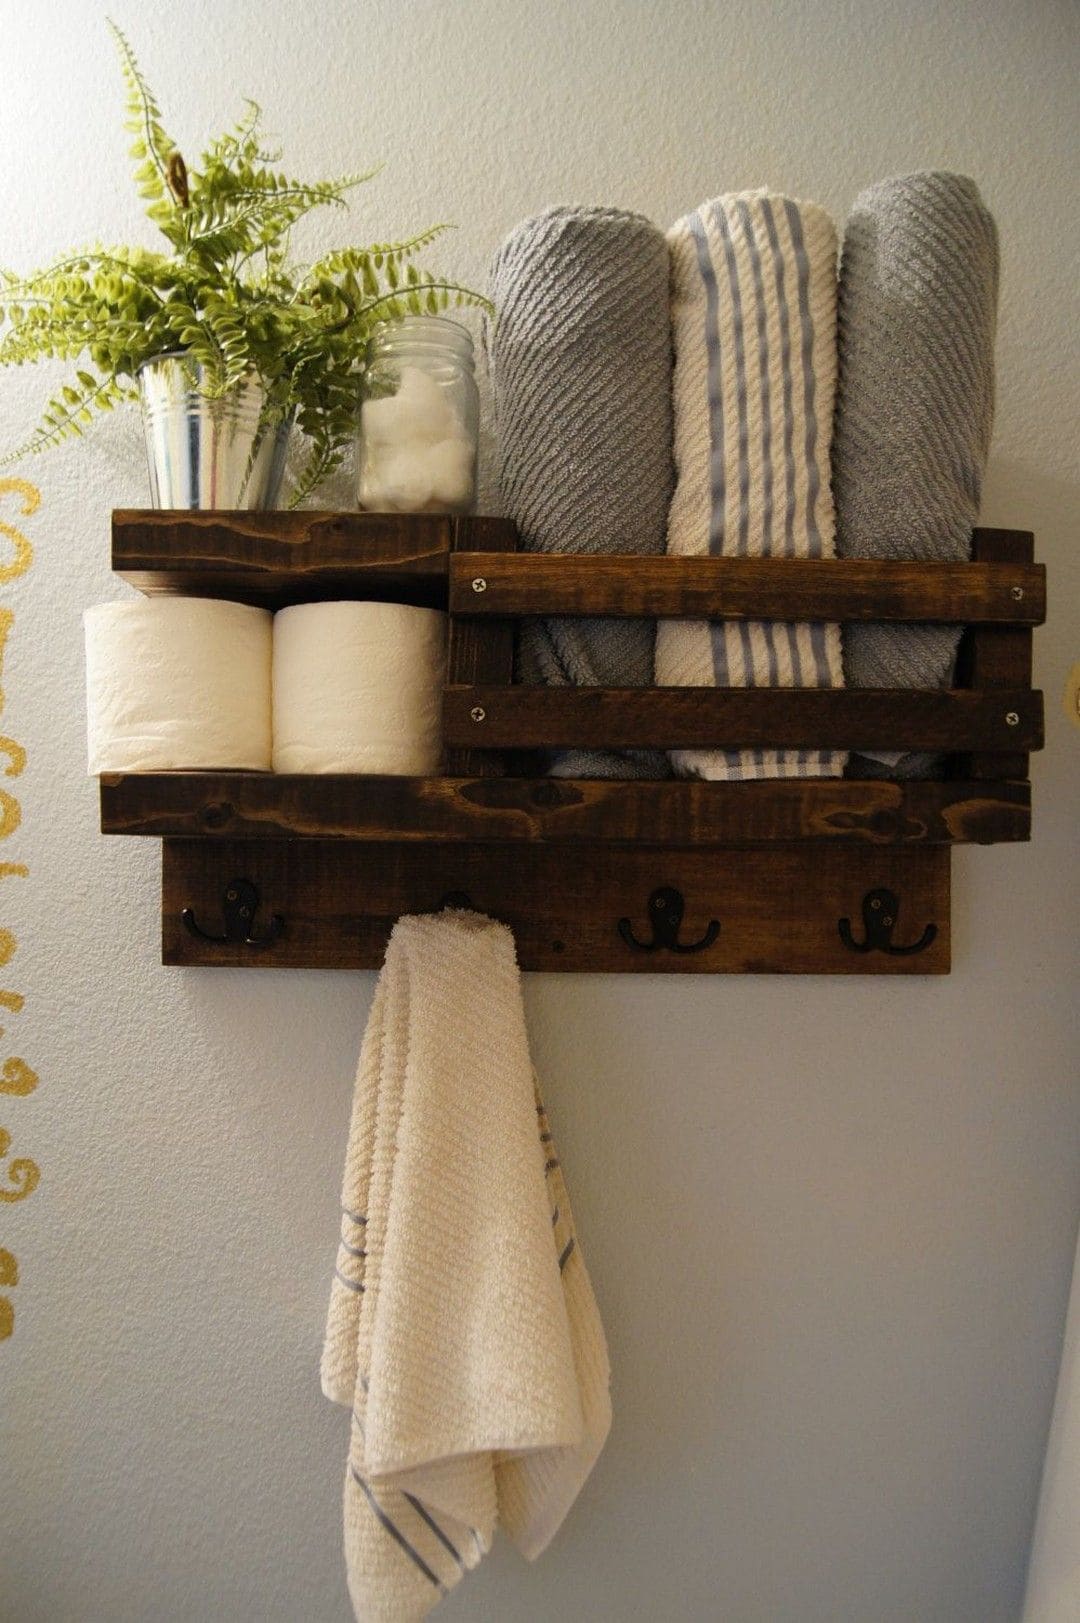 Pallet project ideas to decorate the bathroom - 73